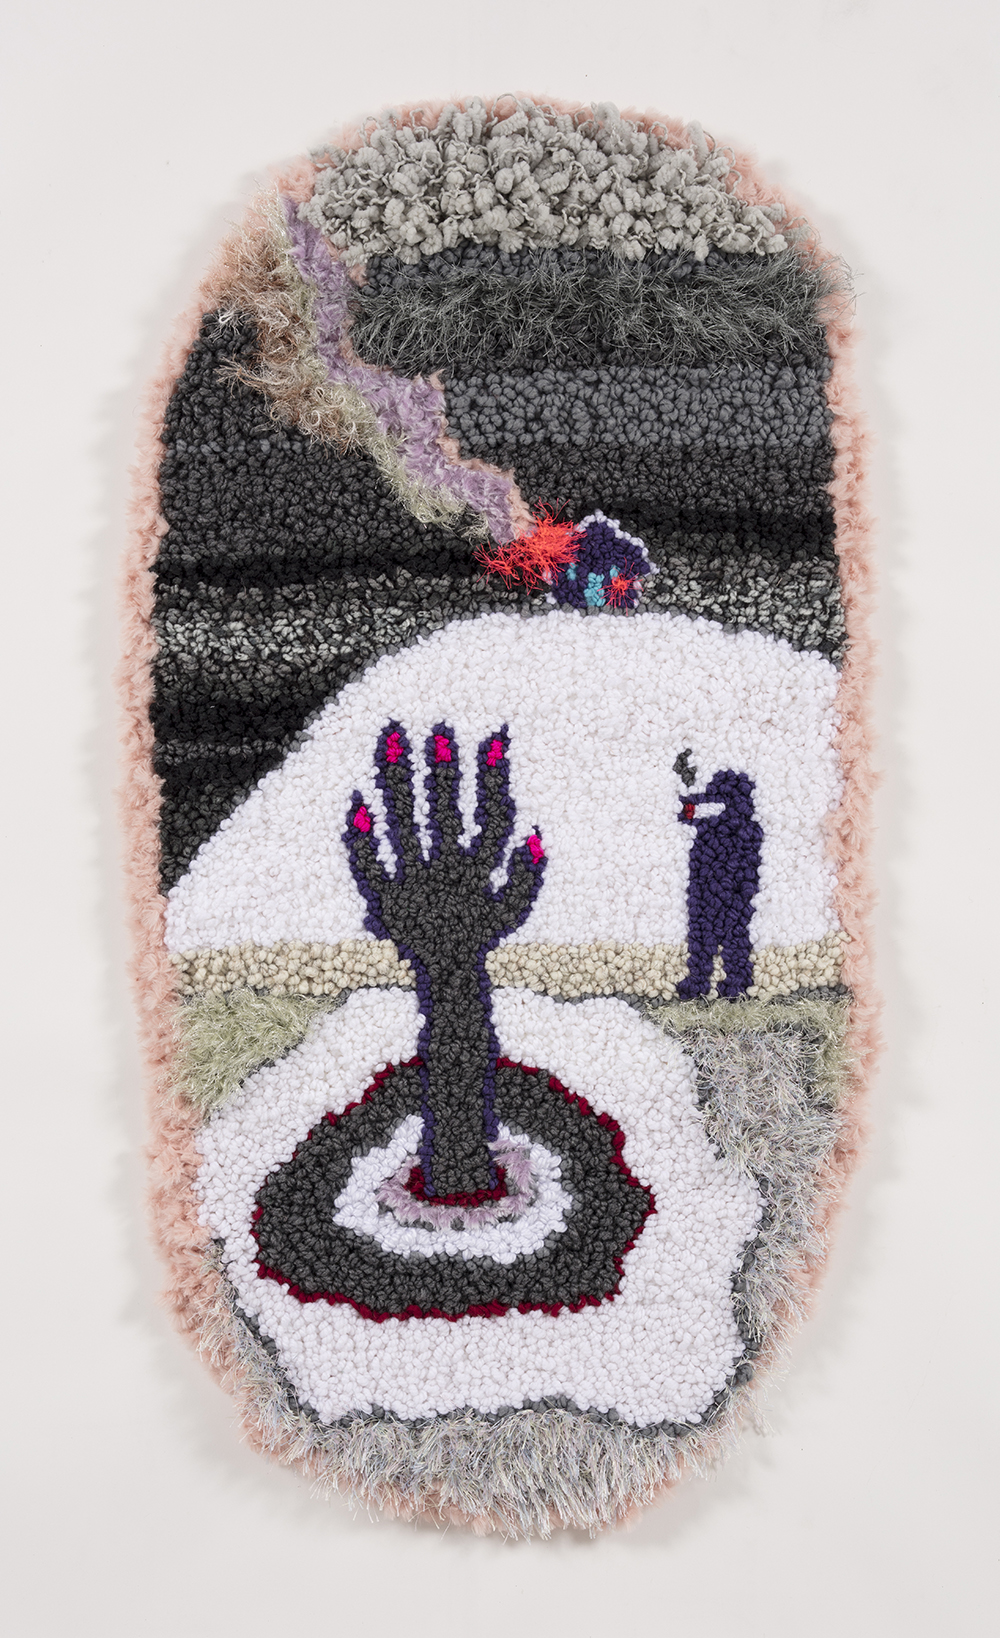 Hannah Epstein.<em> At the river with my baby</em>, 2019. Acrylic, polyester, wool, 45 x 23 inches (114.3 x 58.4 cm)